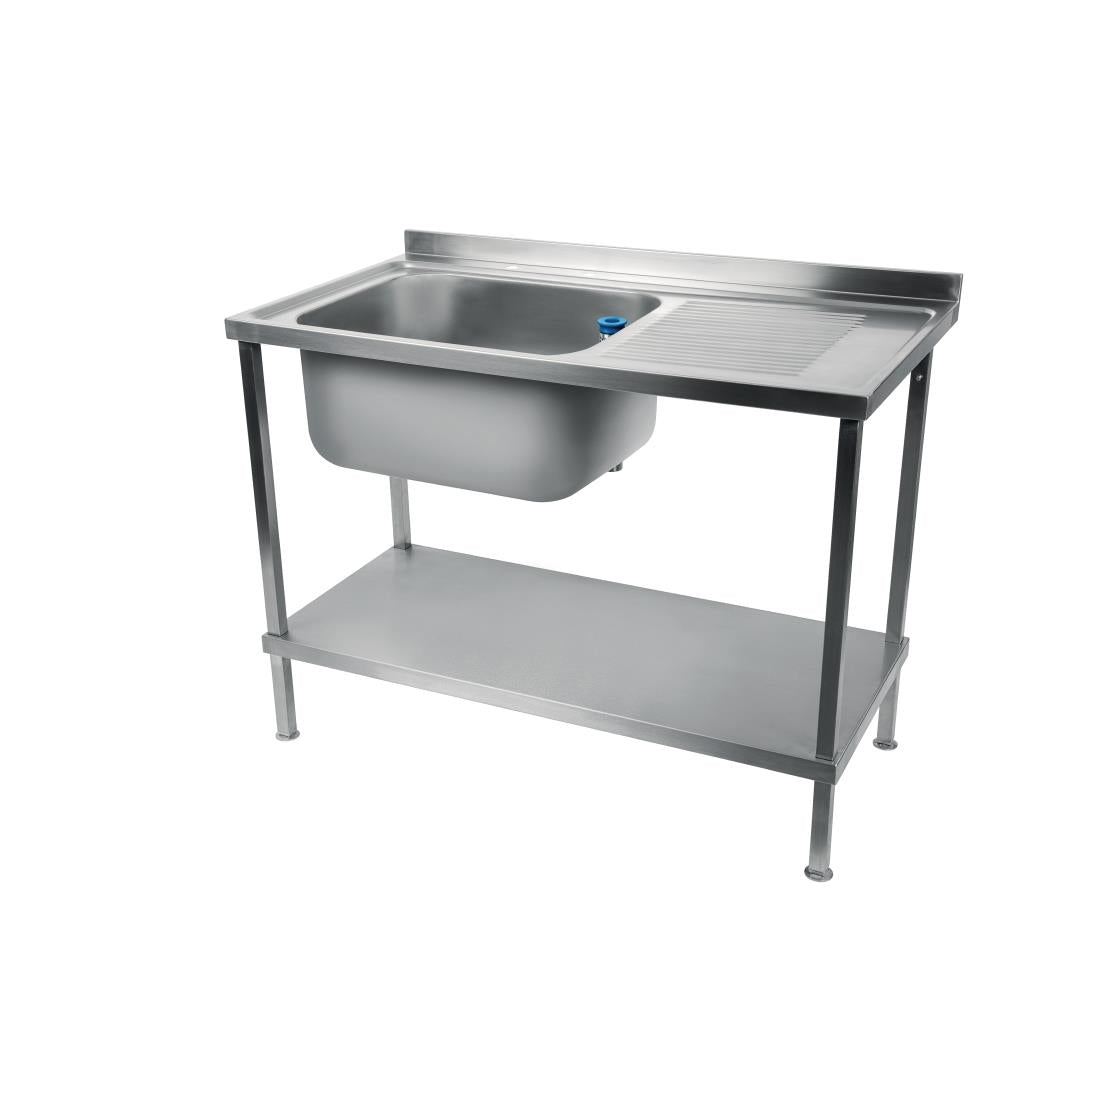 DR380 Holmes Fully Assembled Stainless Steel Sink Right Hand Drainer 1000mm JD Catering Equipment Solutions Ltd